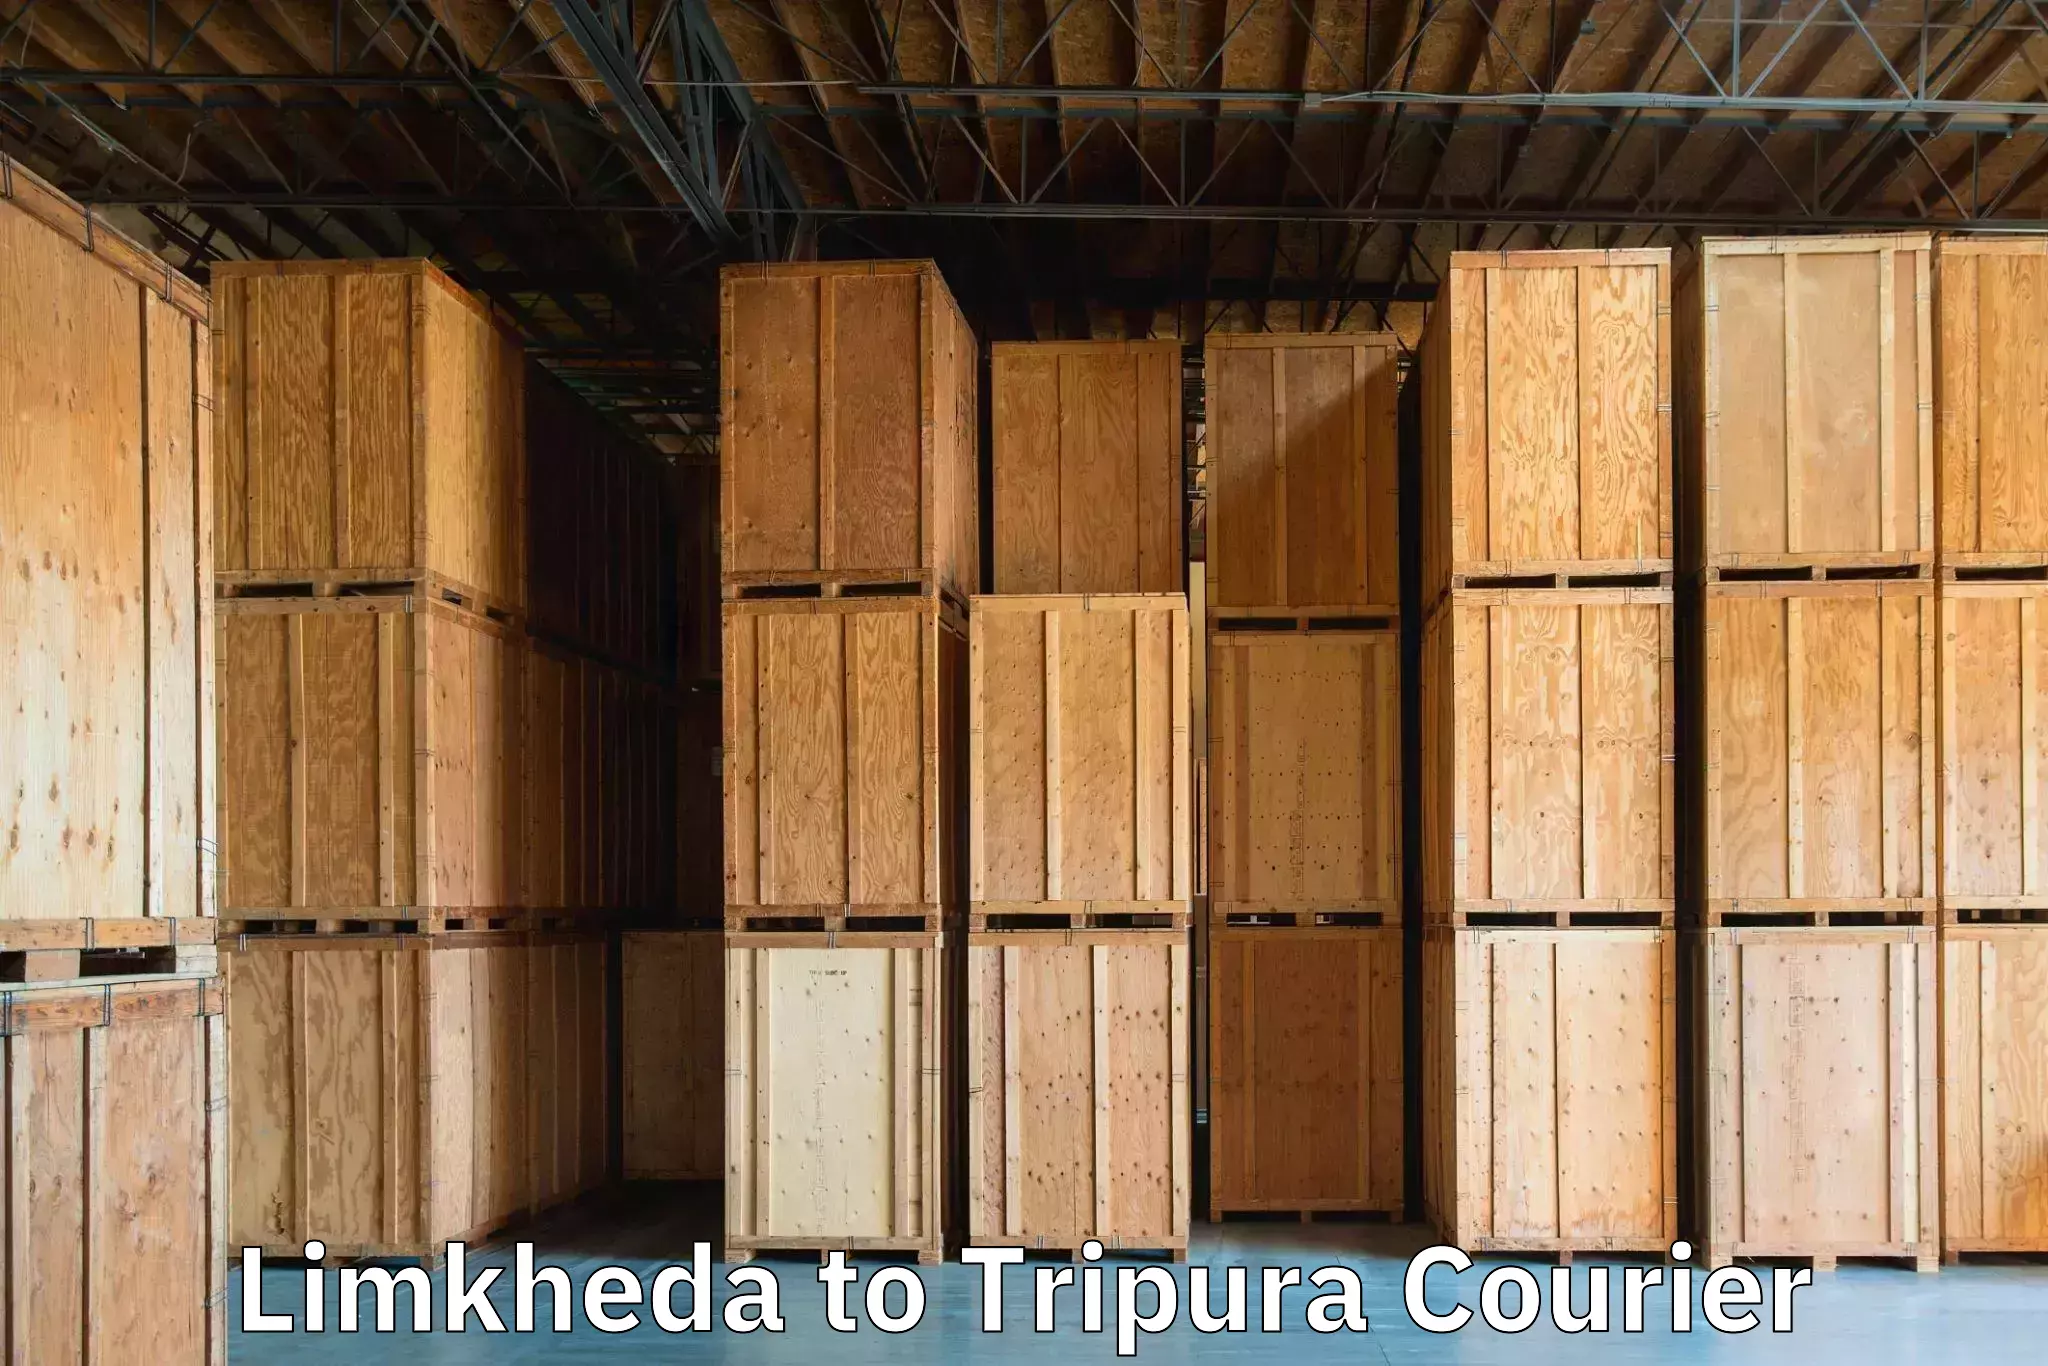 Online luggage shipping in Limkheda to Udaipur Tripura